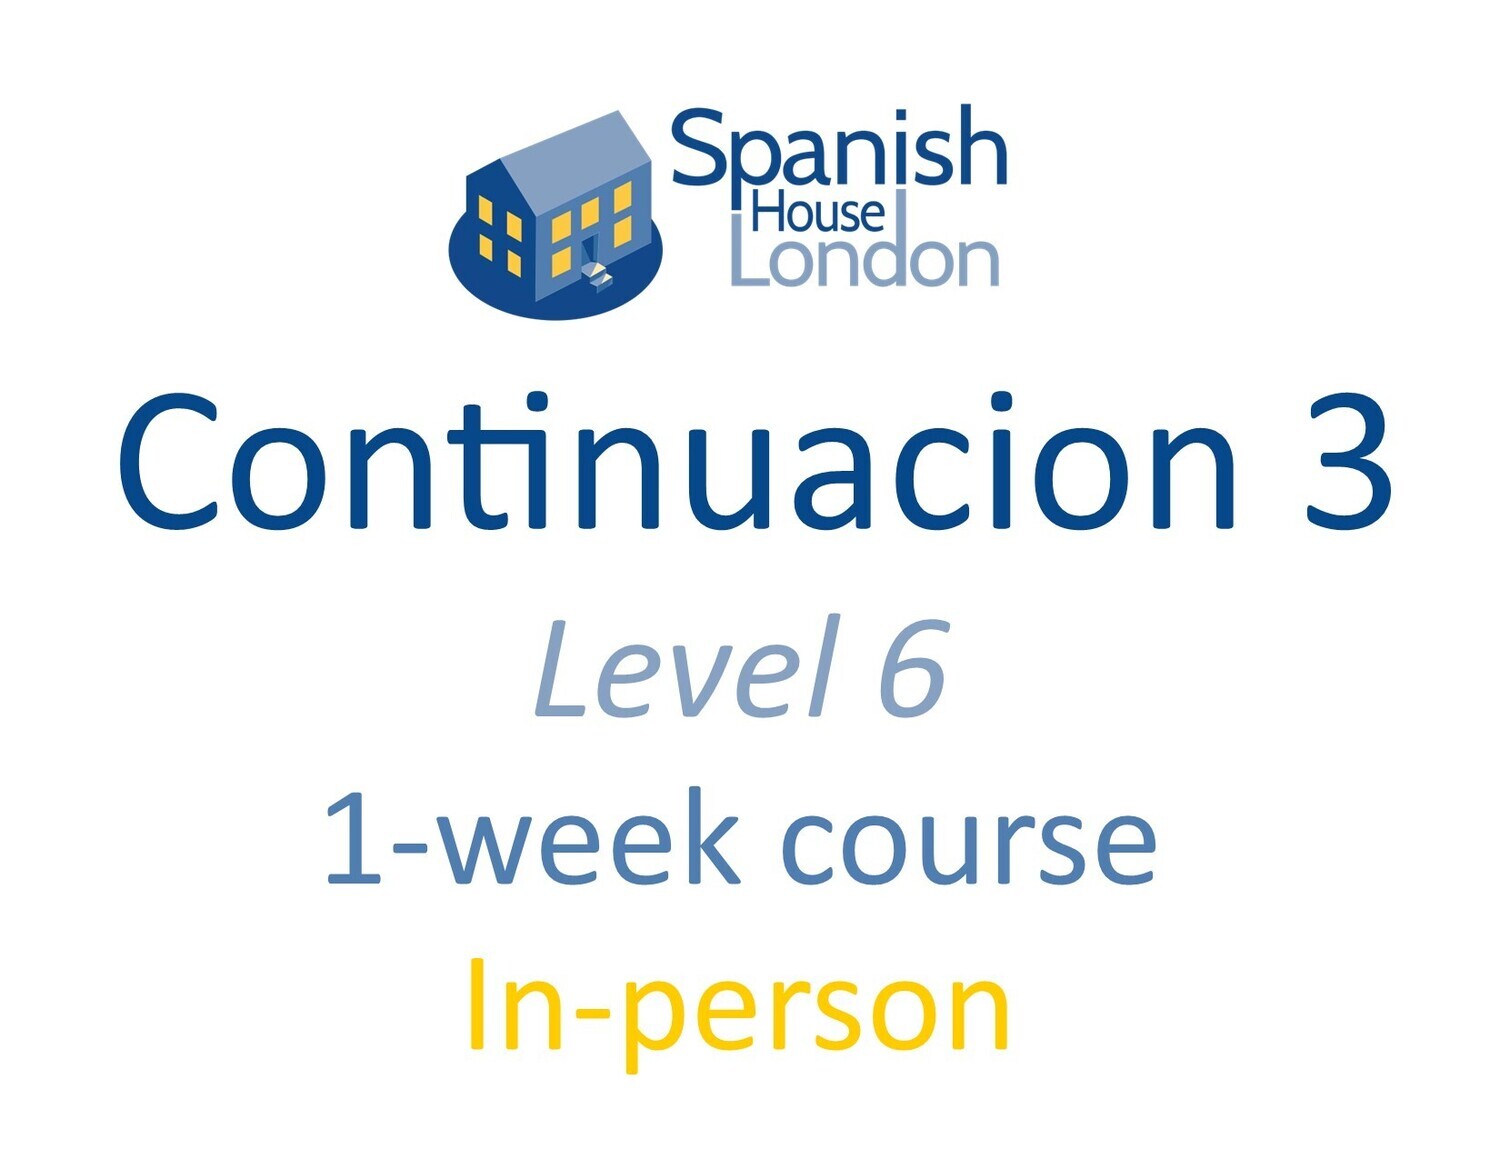 One-Week Intensive Continuacion 3 Course starting on 13th February at 10.30am in Clapham North